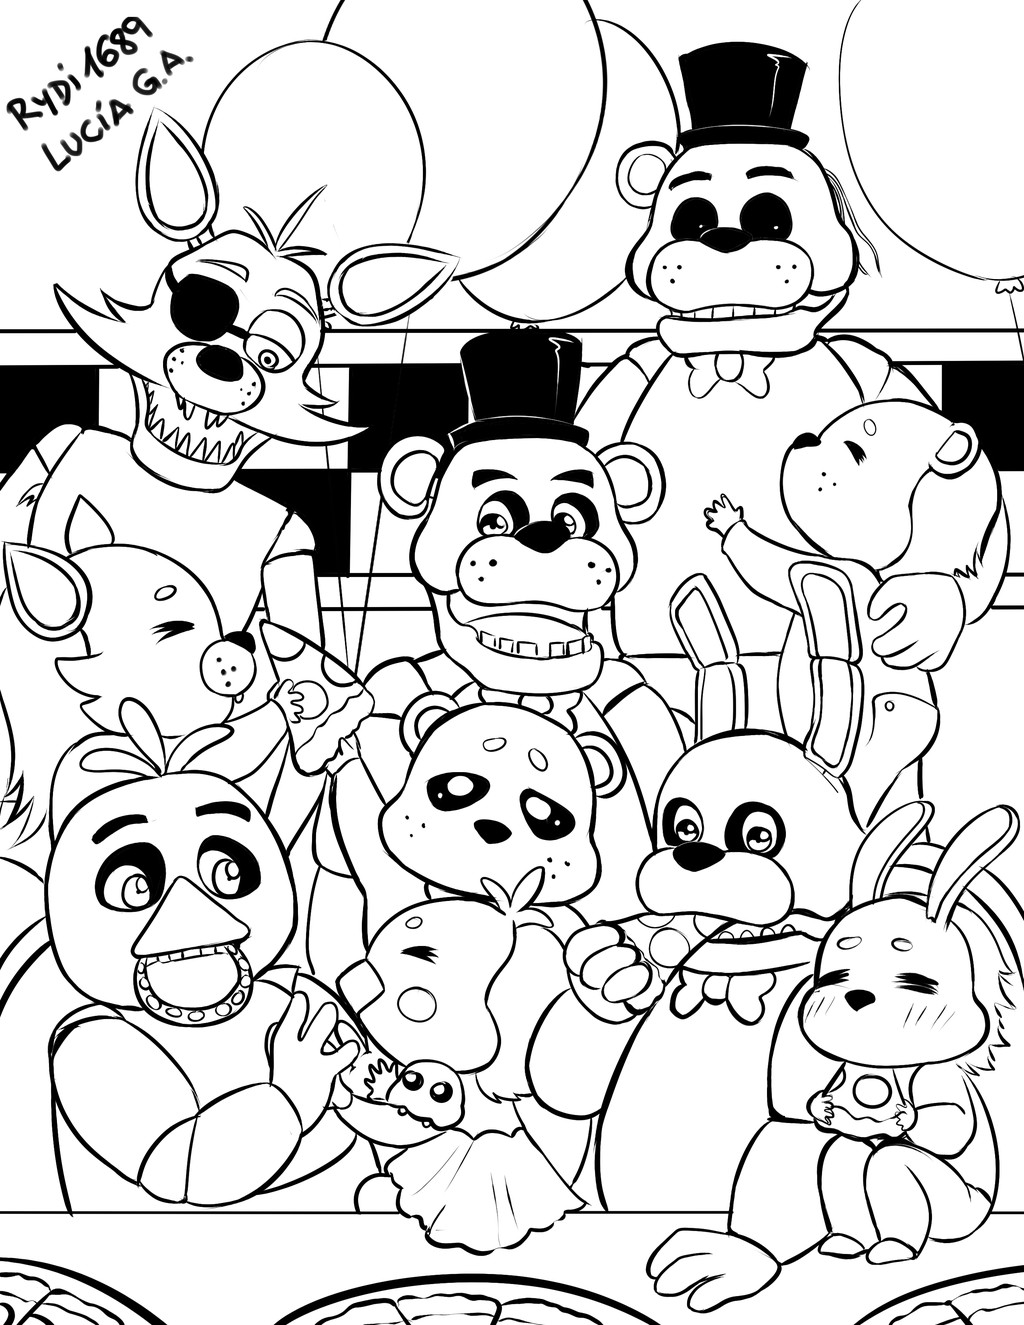 Five Nights At Freddy Coloring Pages
 Bonnie Five Nights At Freddy Coloring Pages Coloring Pages